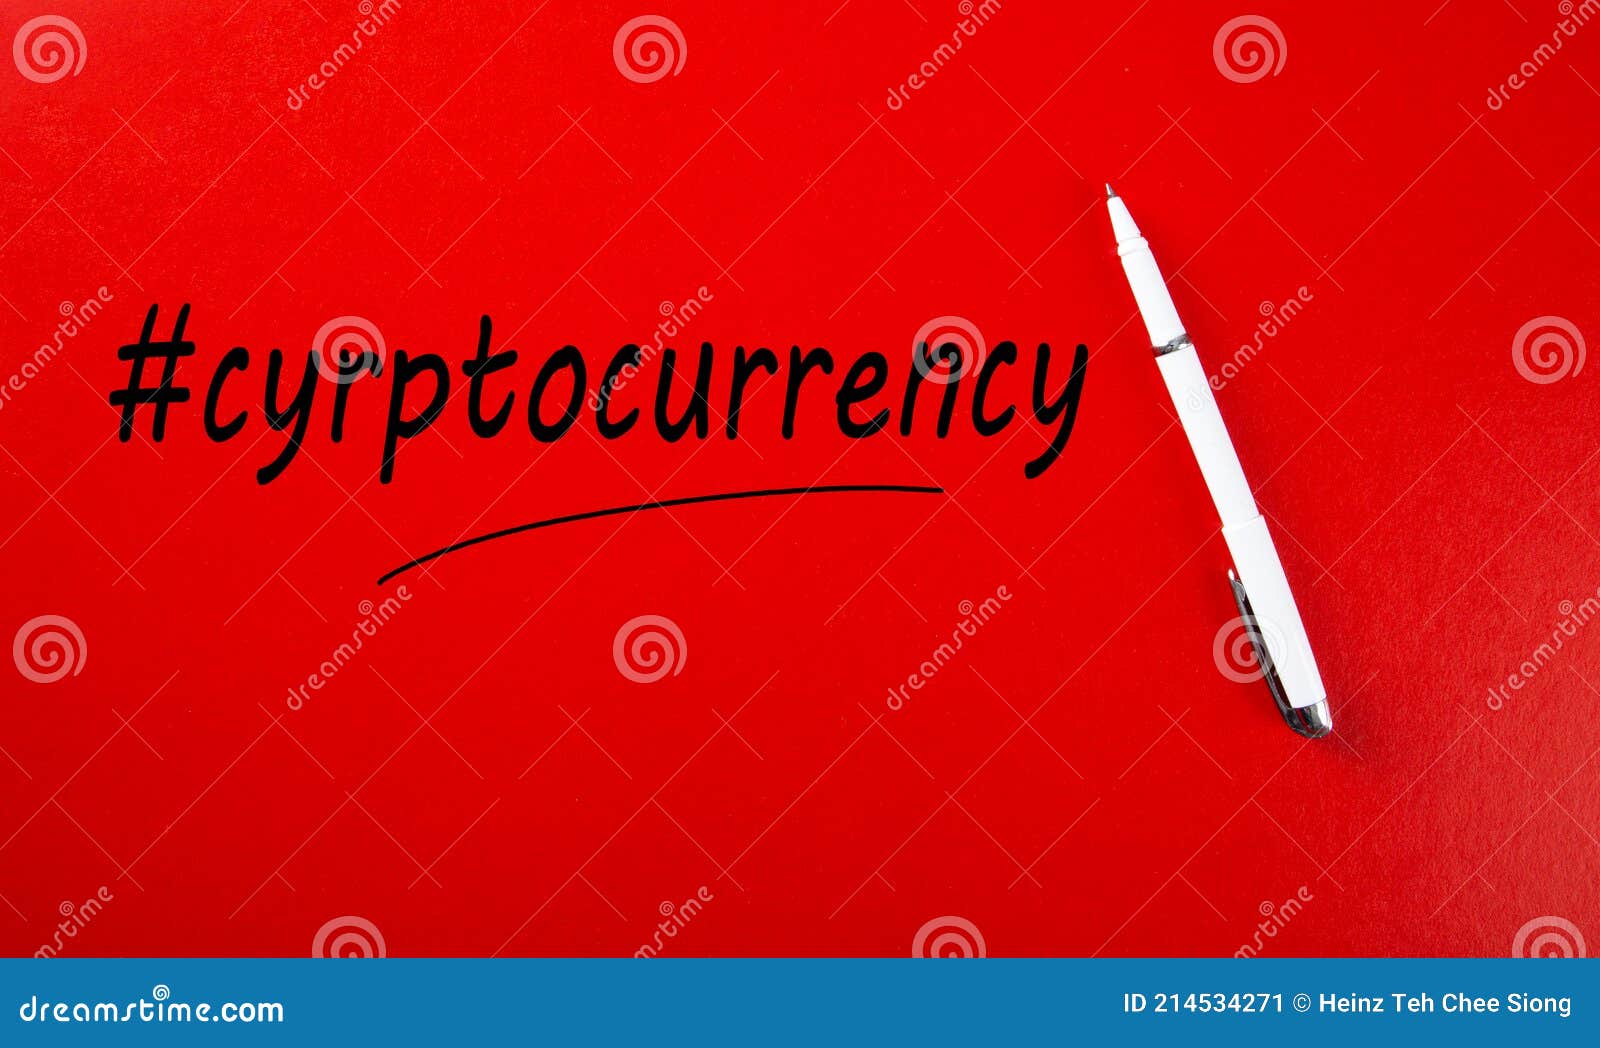 Cryptocurrency hashtags crypto gain limited